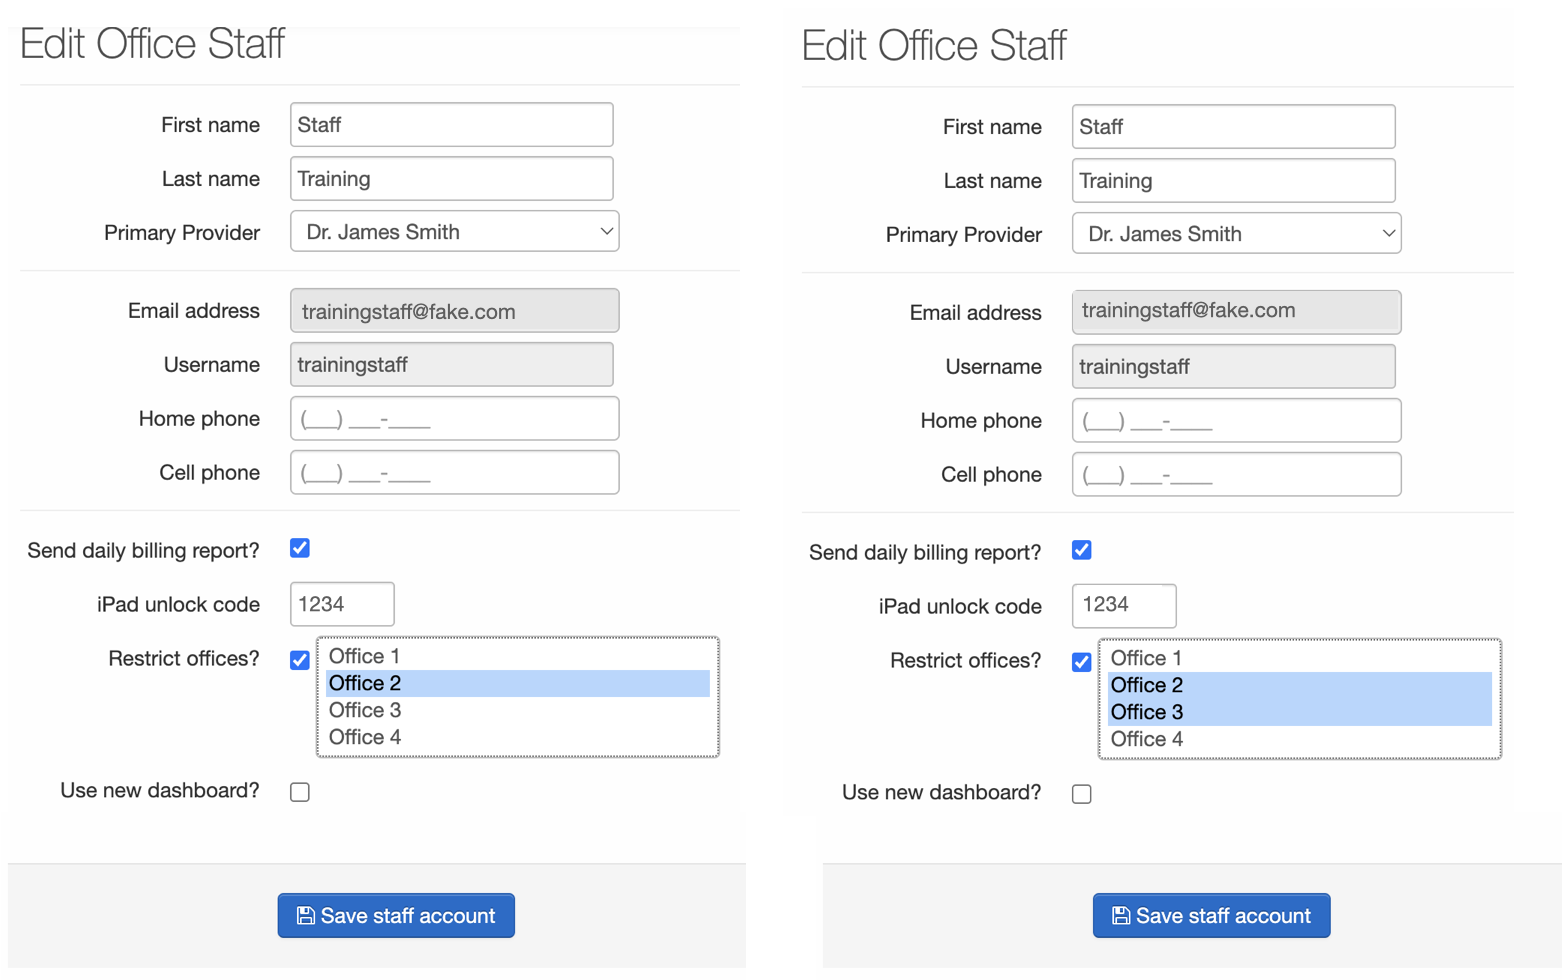 Restrict_Offices_Options_Selected_side_by_side.png